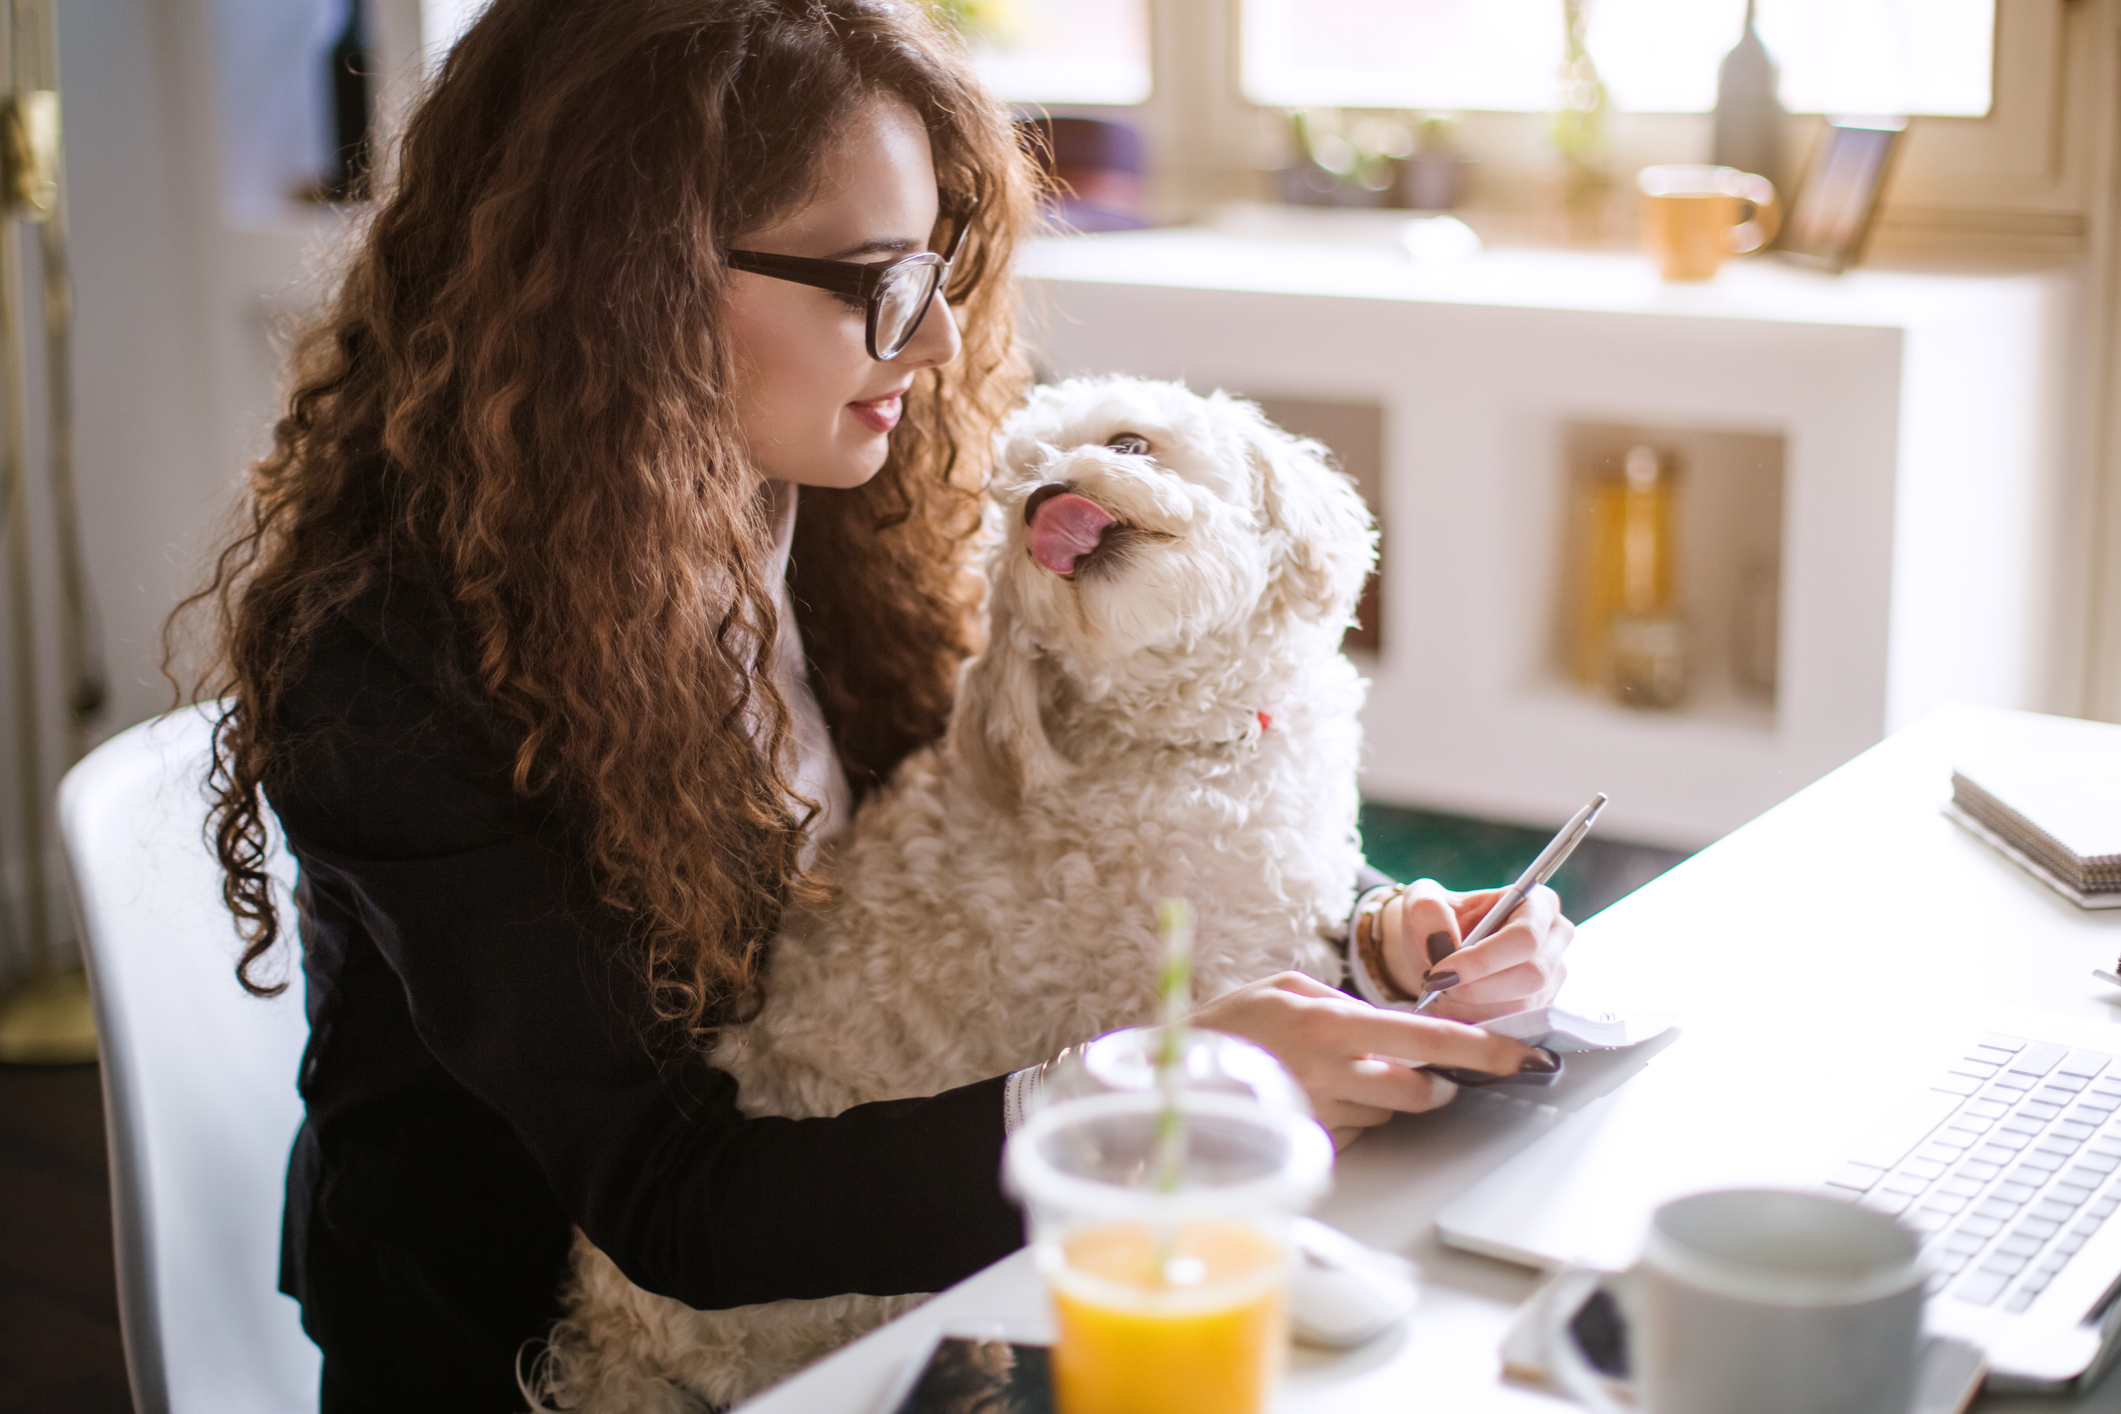 working and holding her dog in her lap.